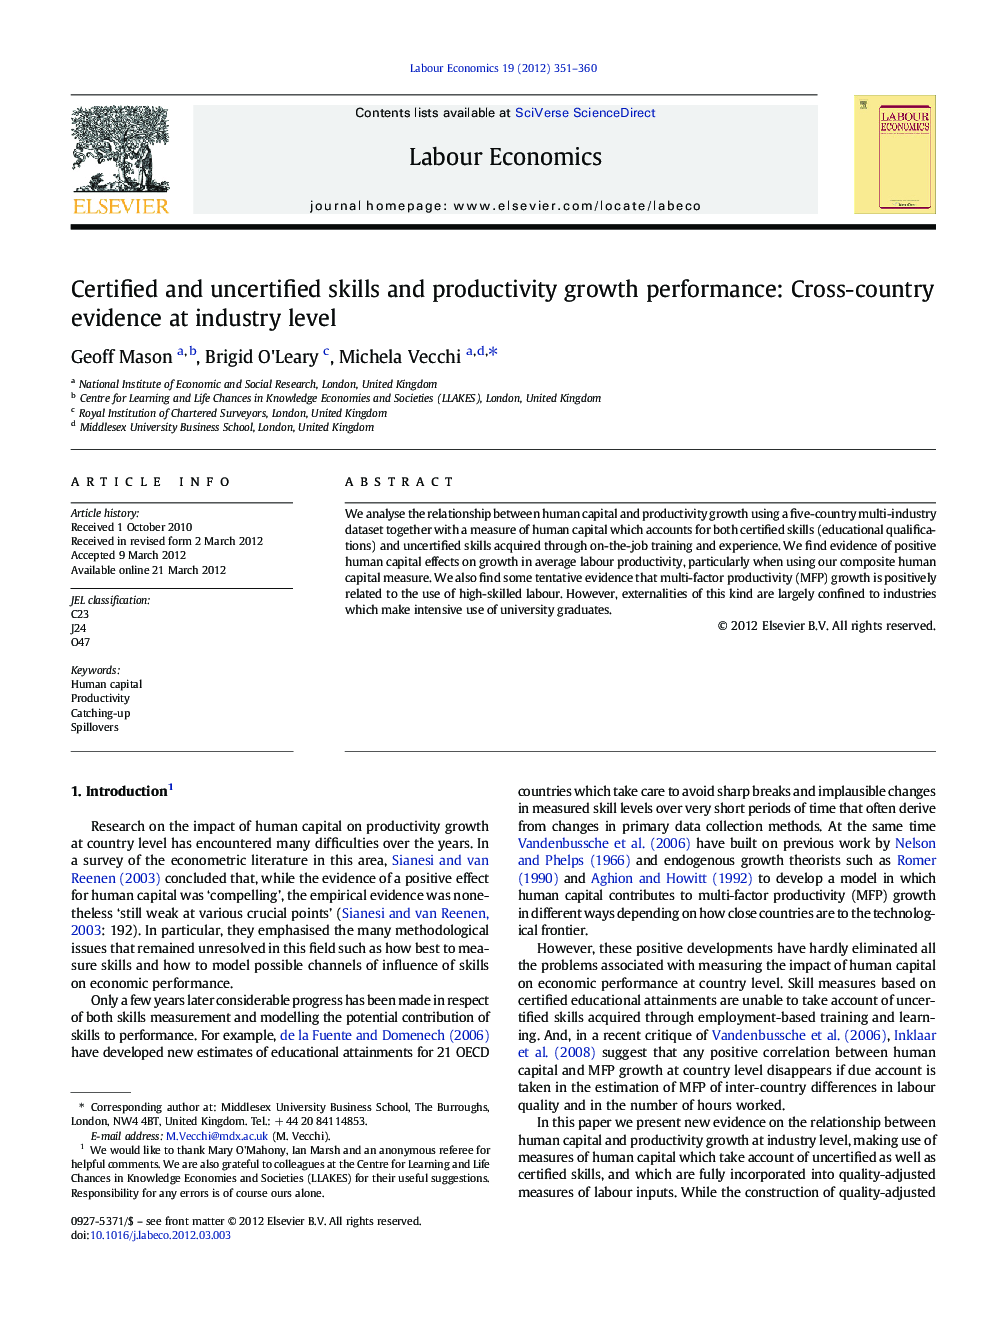 Certified and uncertified skills and productivity growth performance: Cross-country evidence at industry level